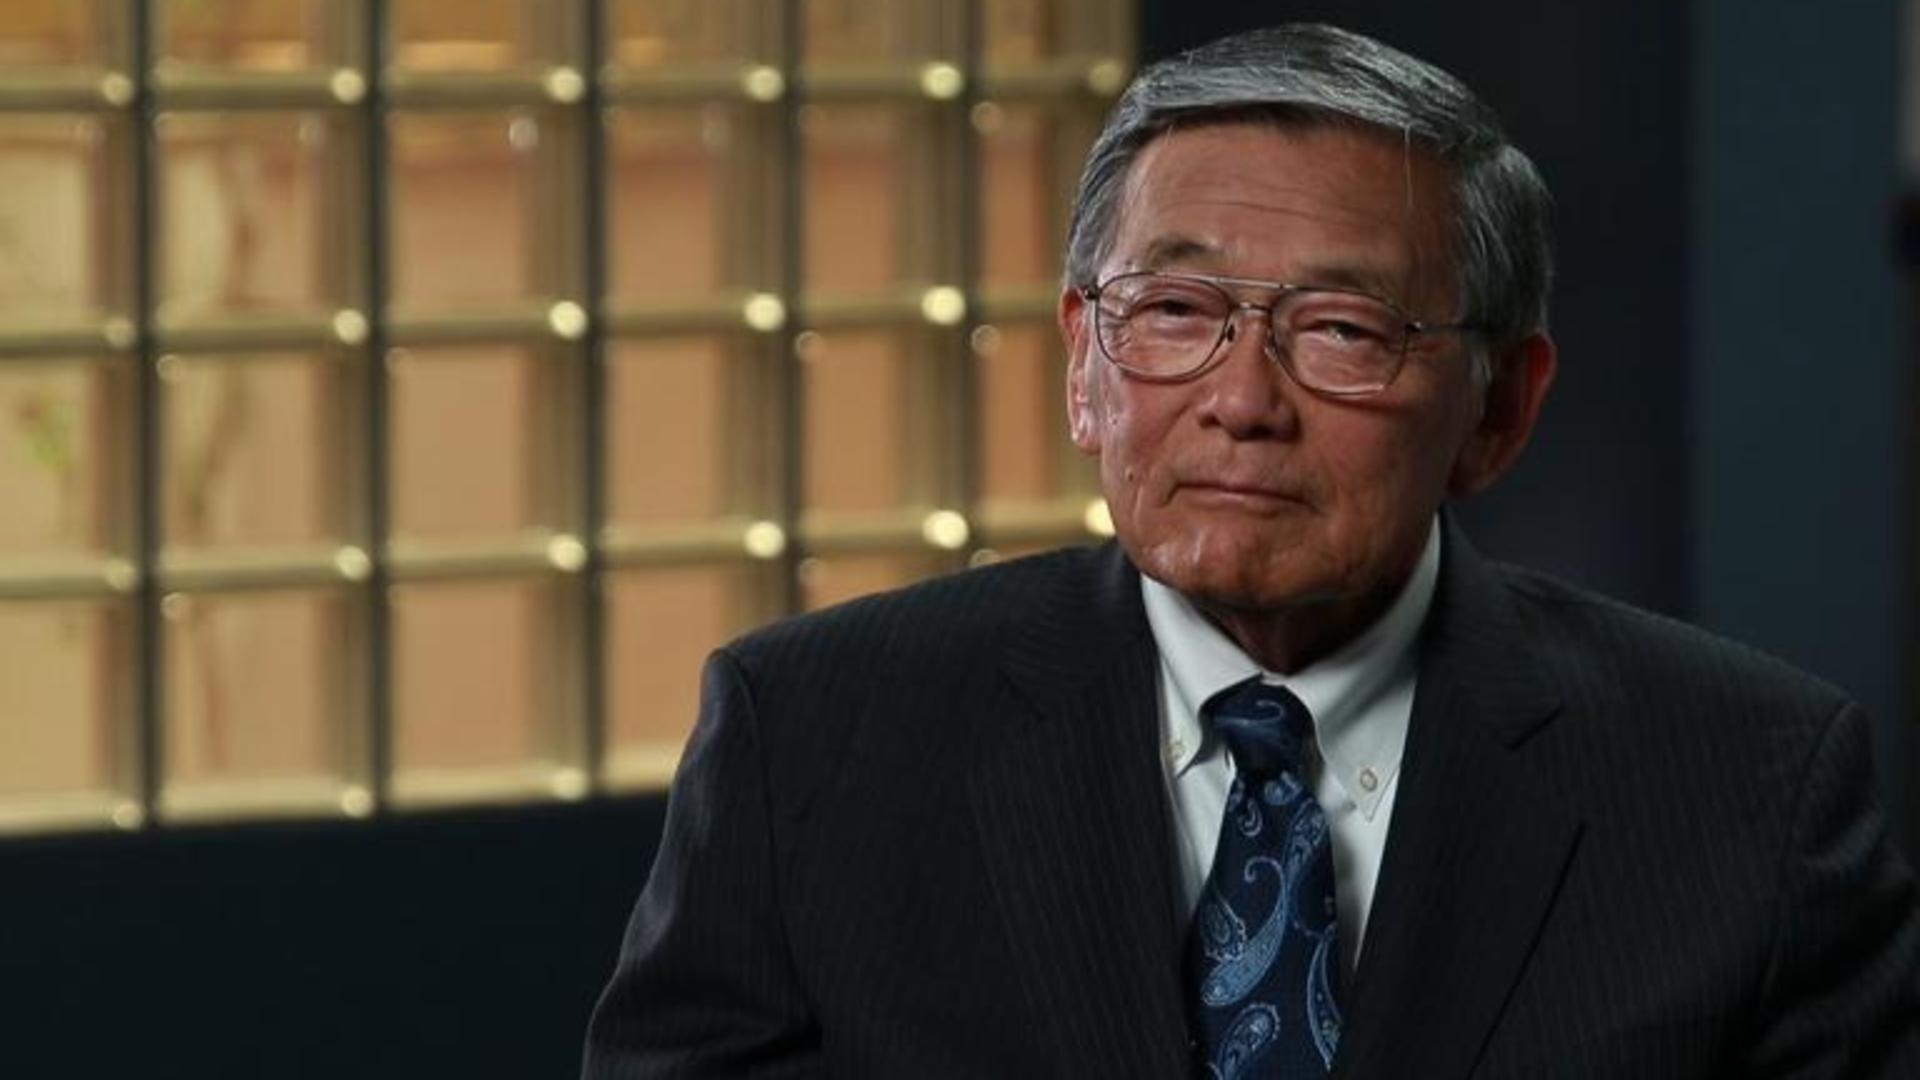 NORMAN MINETA AND HIS LEGACY: AN AMERICAN STORY